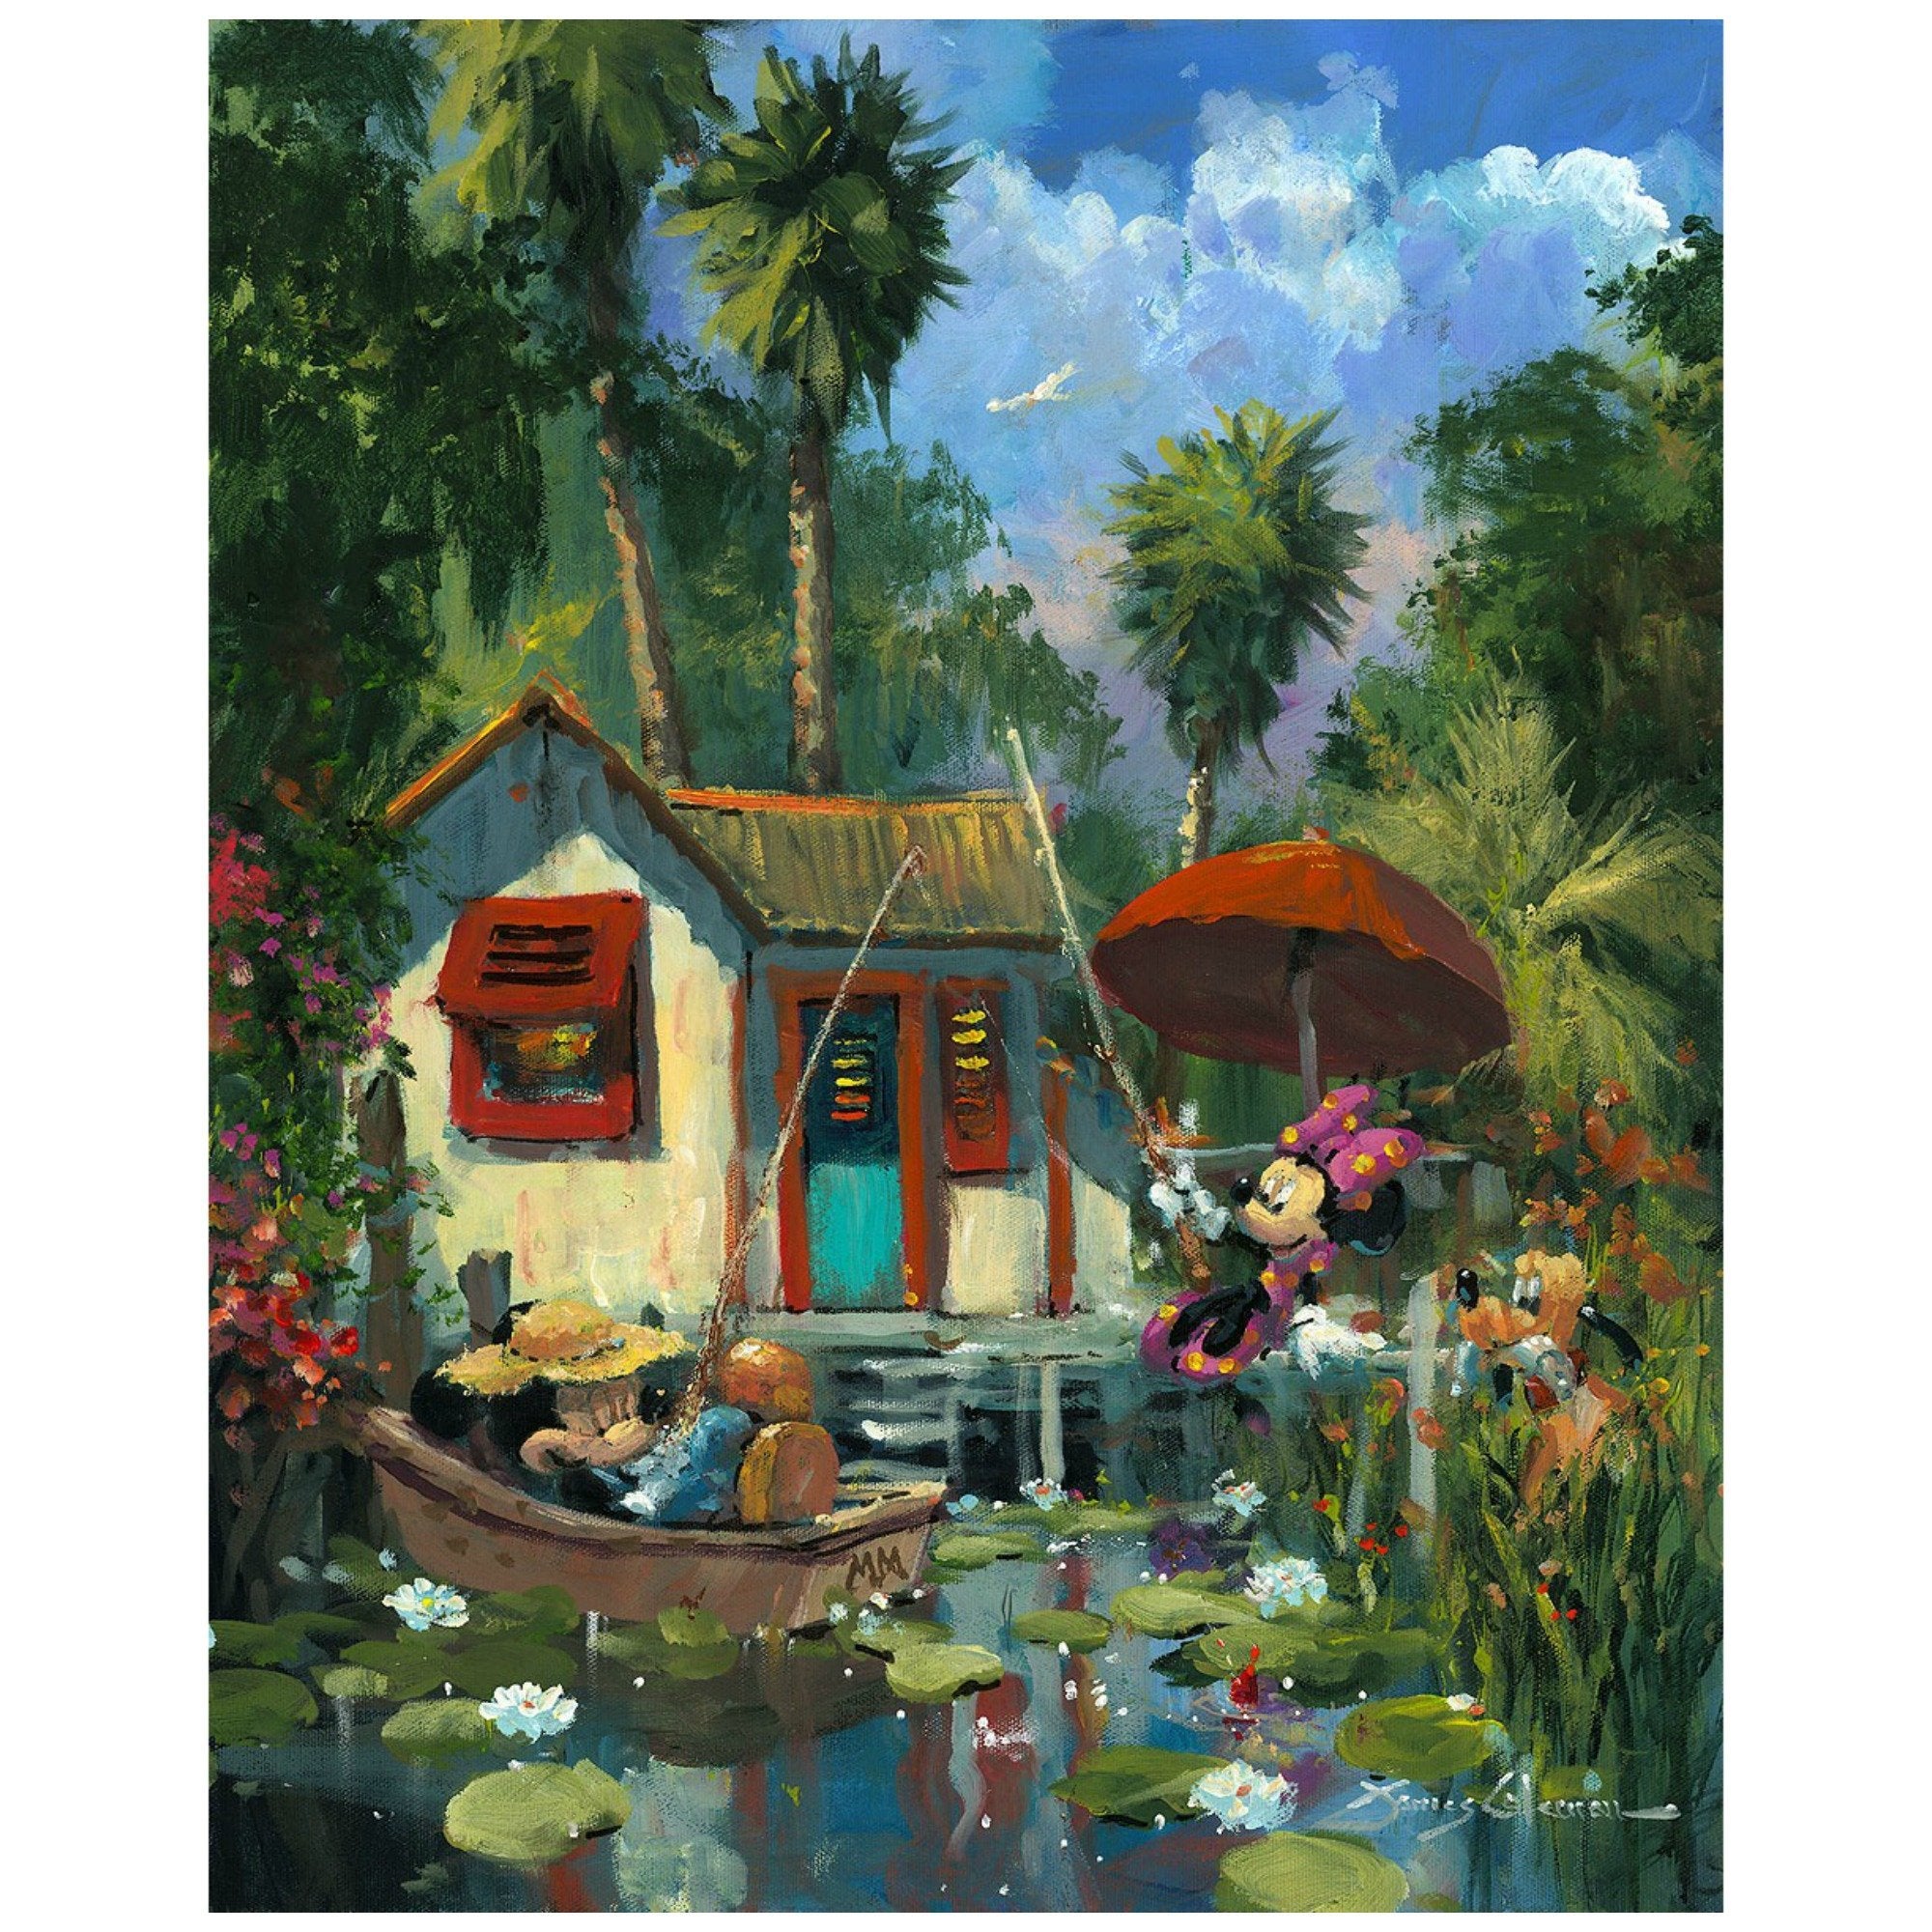 Florida Fishin by James Coleman-  Minnie fishs by the lily pond and Mickey naps in a small roll boat.